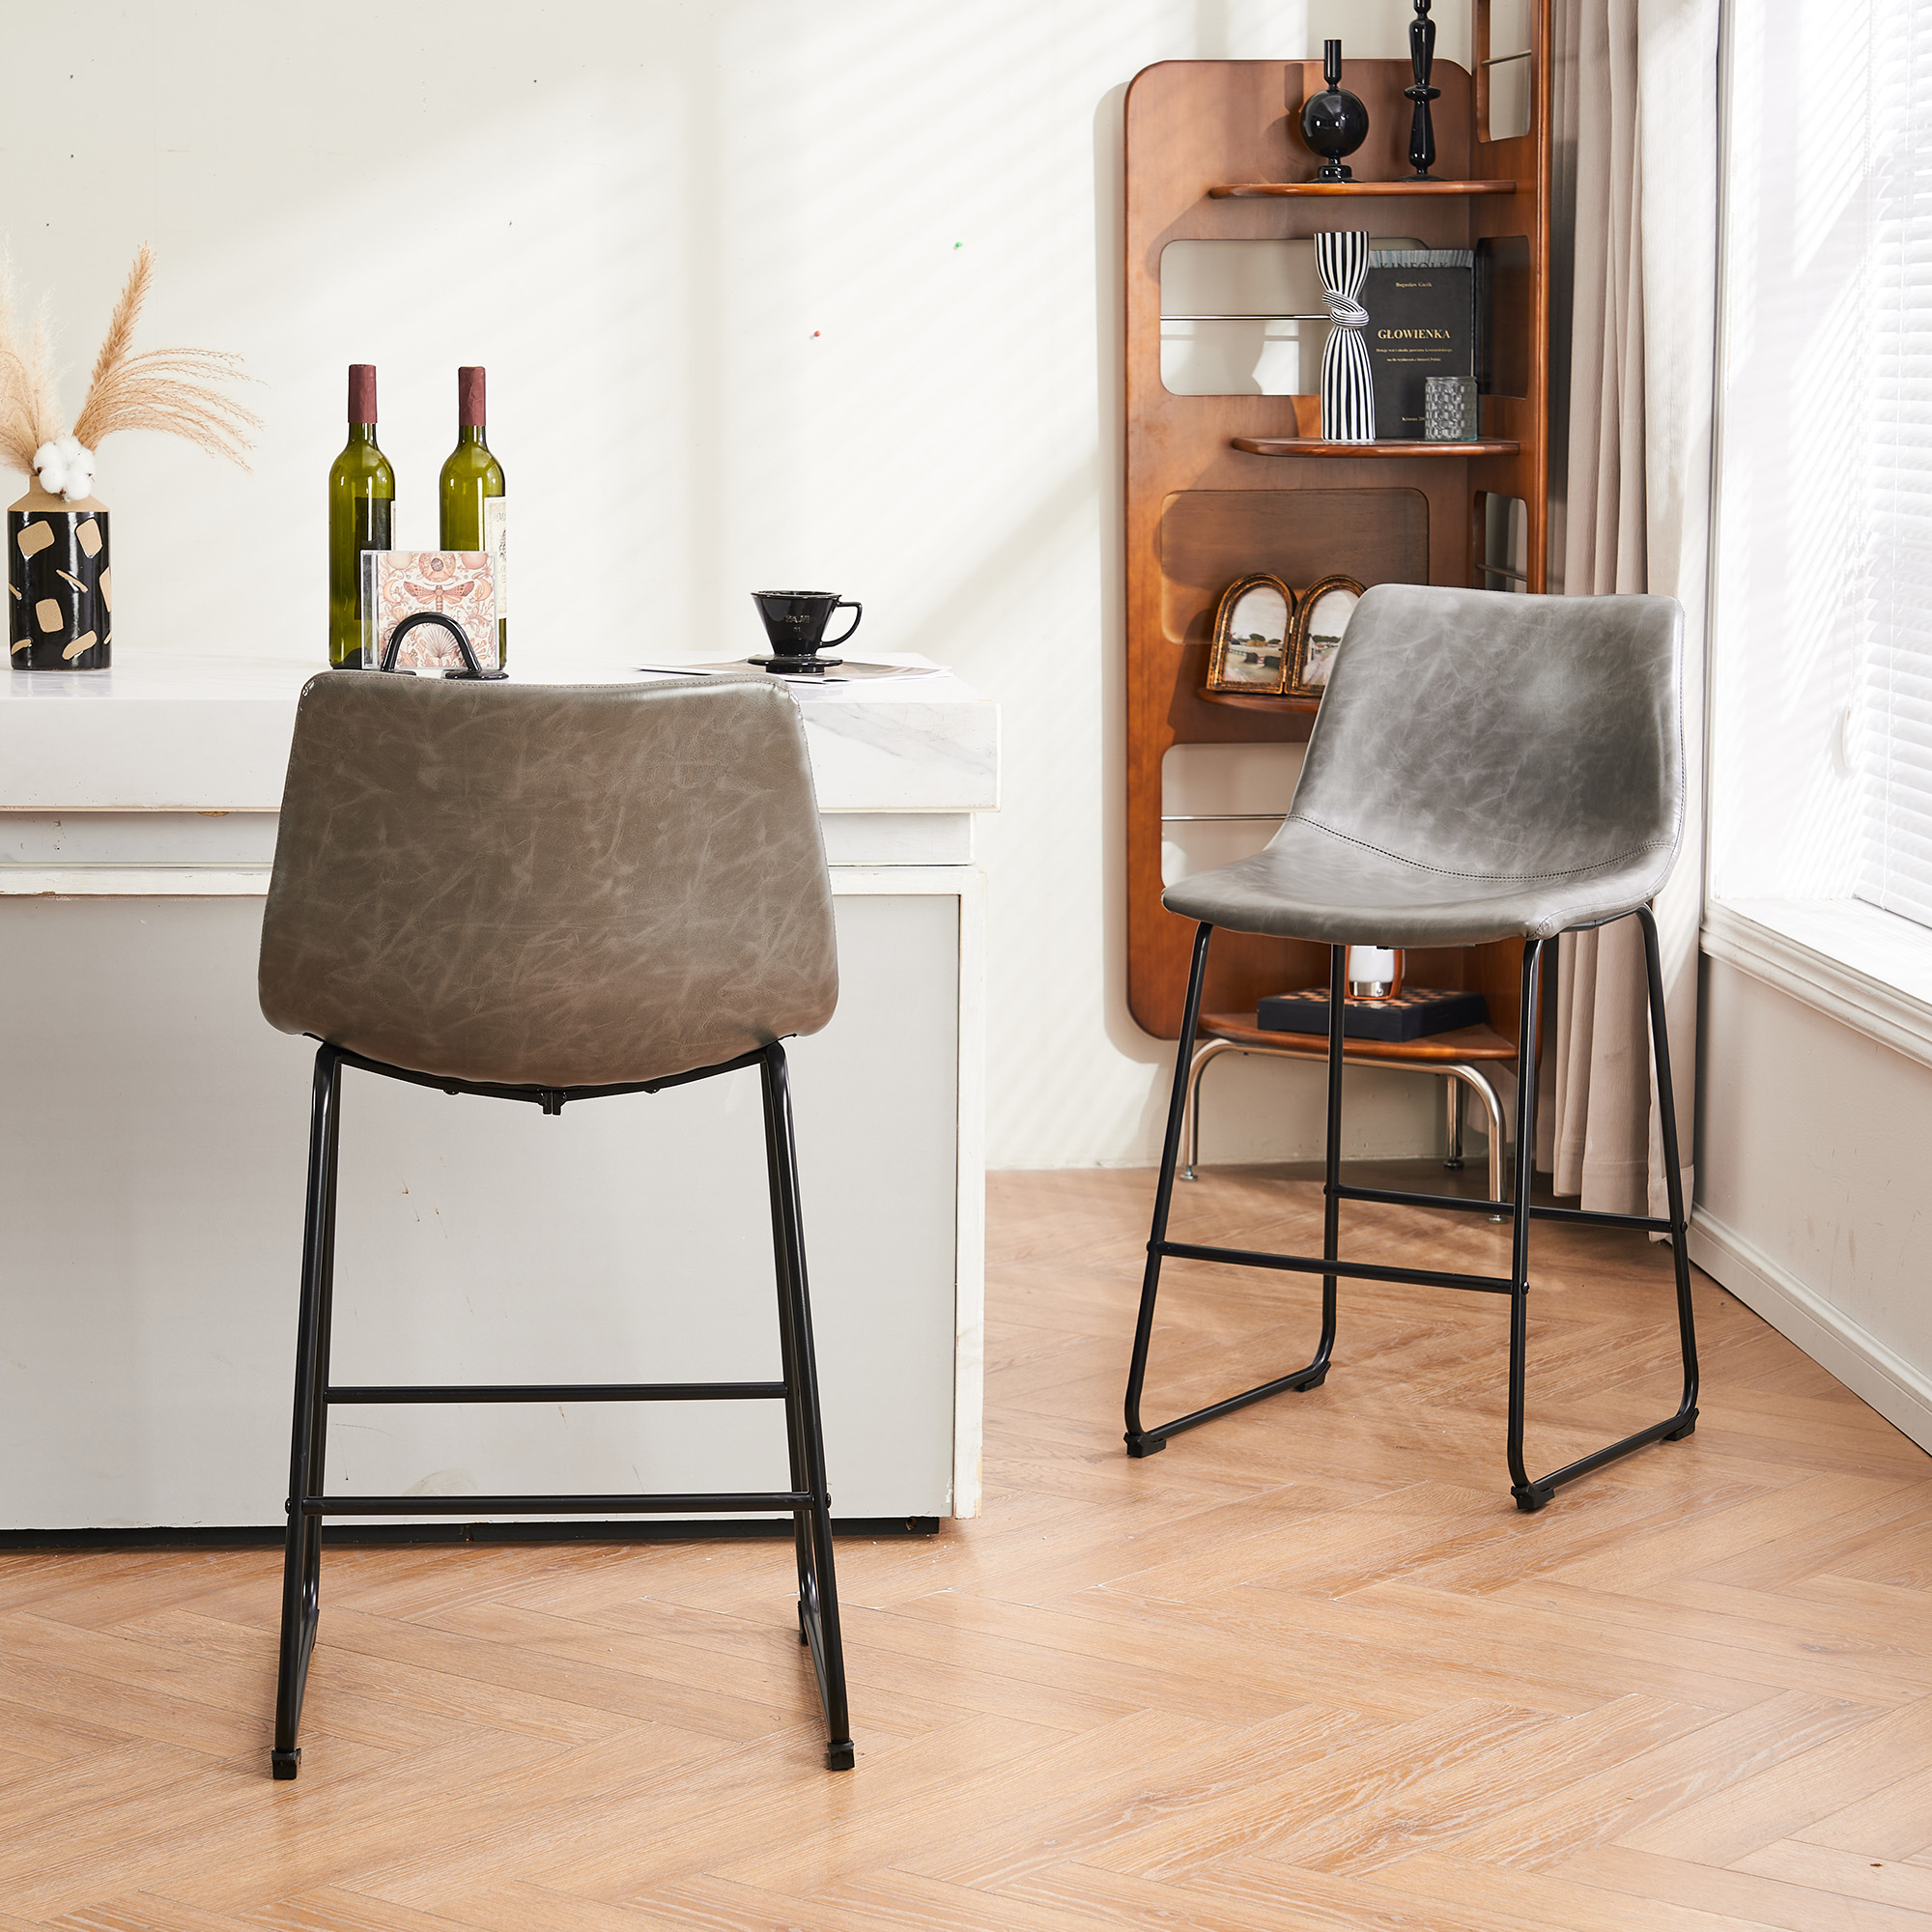 Modern Counter Stool Faux Leather Barstools, Counter Height Bar Stools Set Of 2, 26 Inch Seat Height & 30 Inch Seat Height - 30 Inch